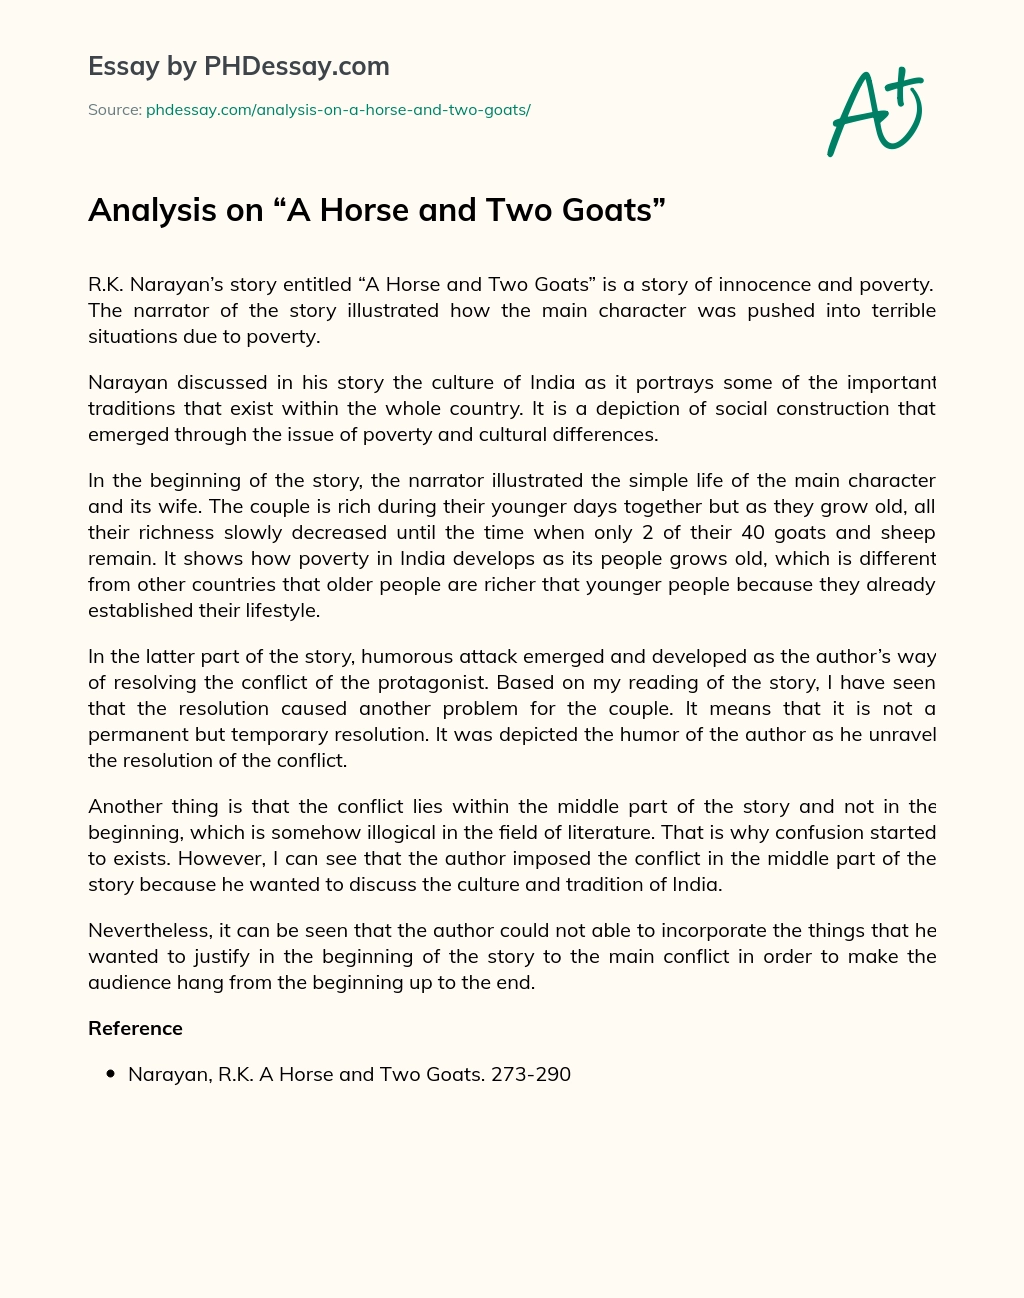 Analysis on “A Horse and Two Goats” essay